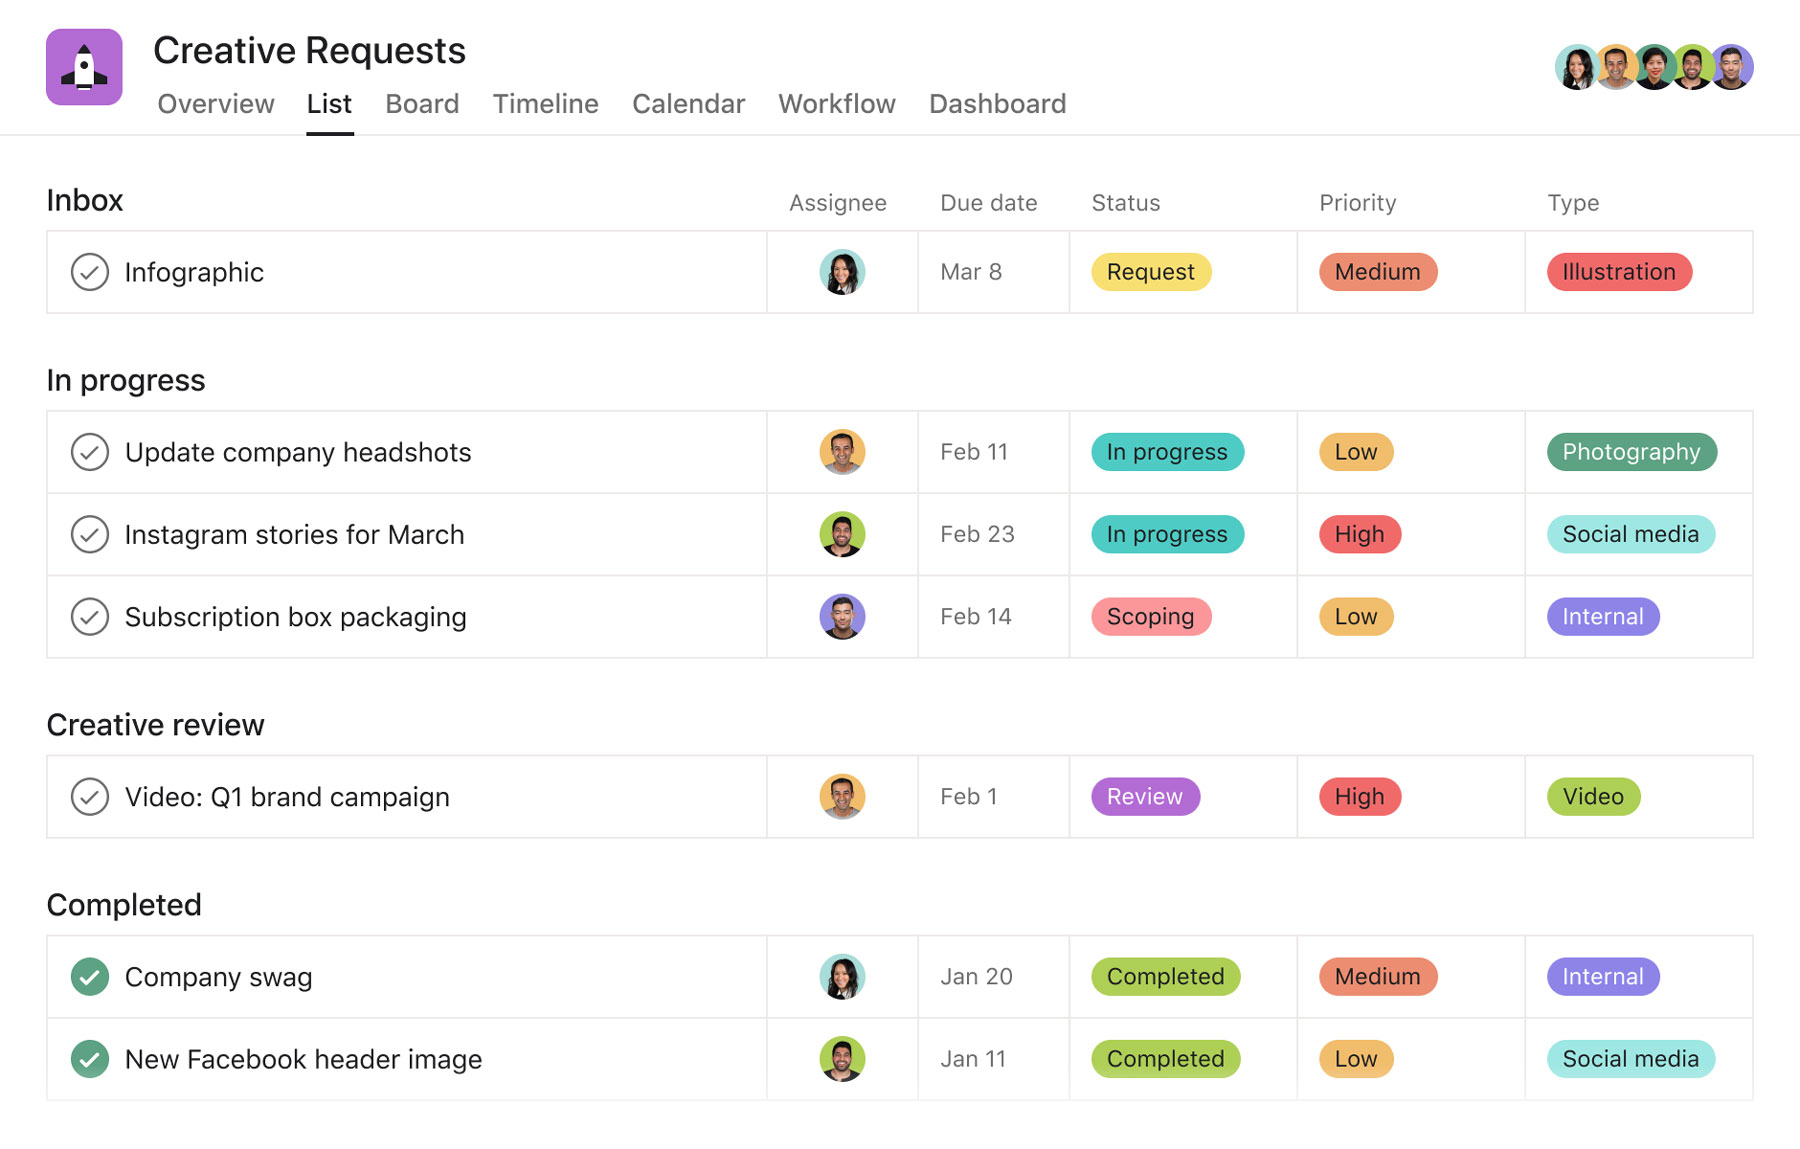 [Product UI] Creative requests project example (Lists)